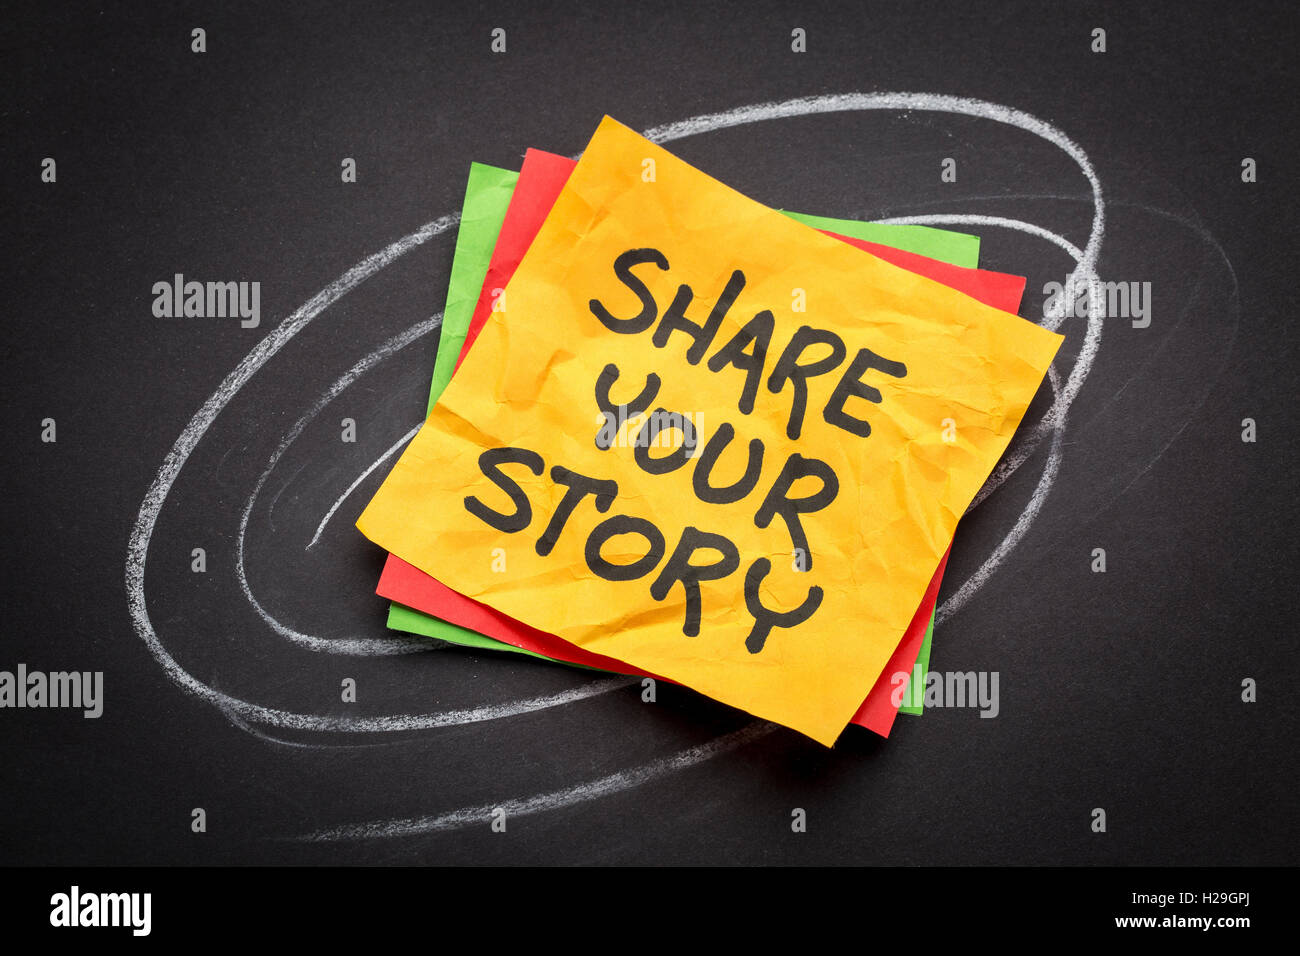 share your story suggestion or advice on a sticky note against black paper Stock Photo